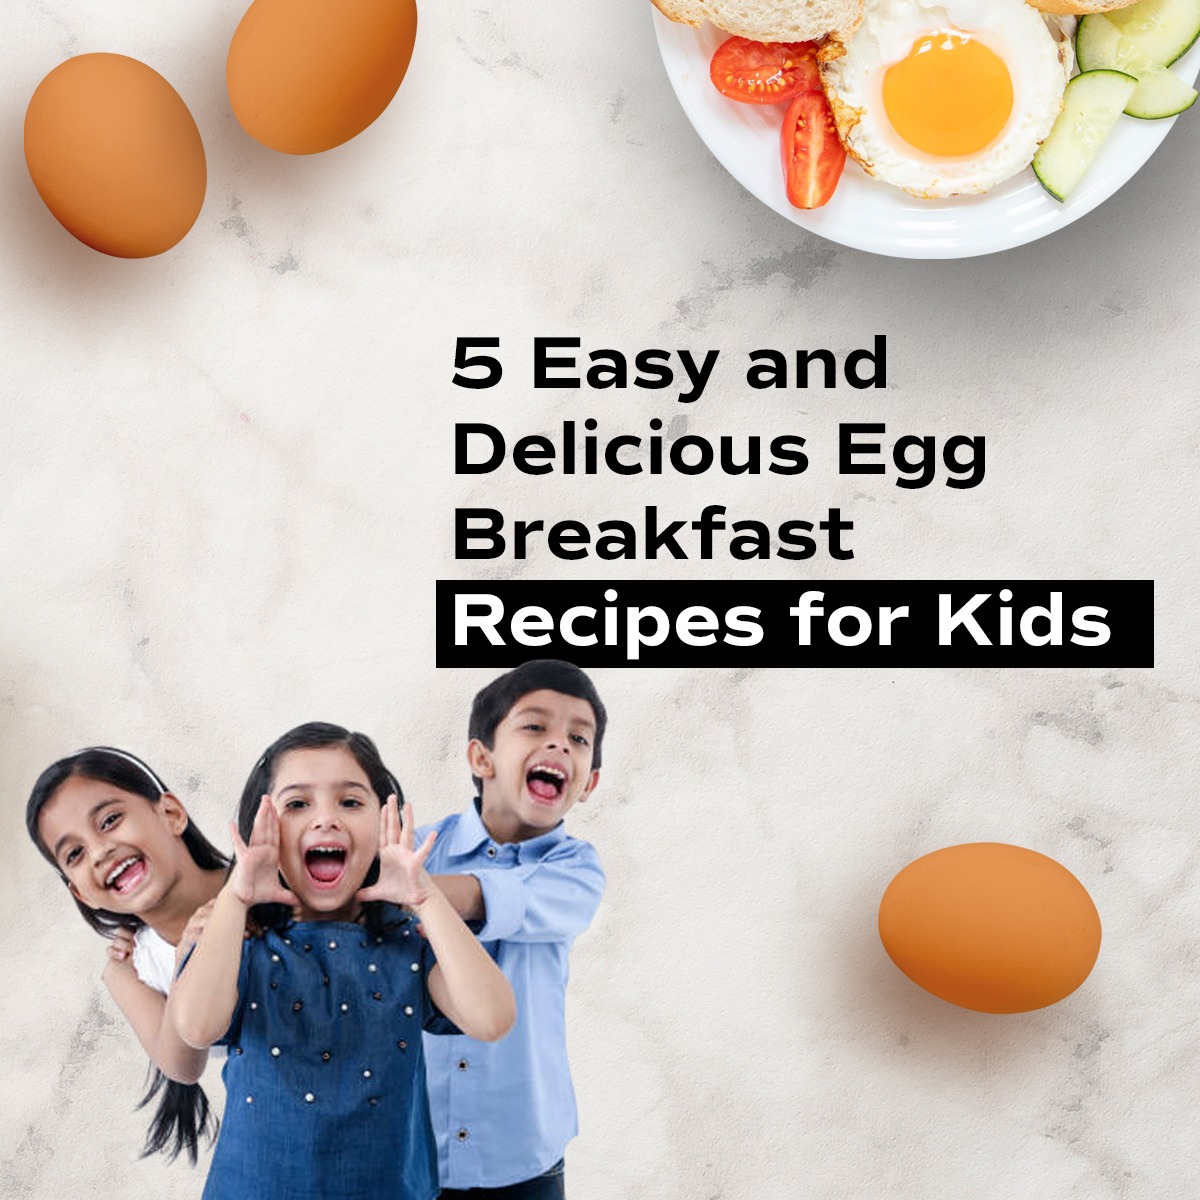 5 Easy and Delicious Egg Breakfast Recipes for Kids